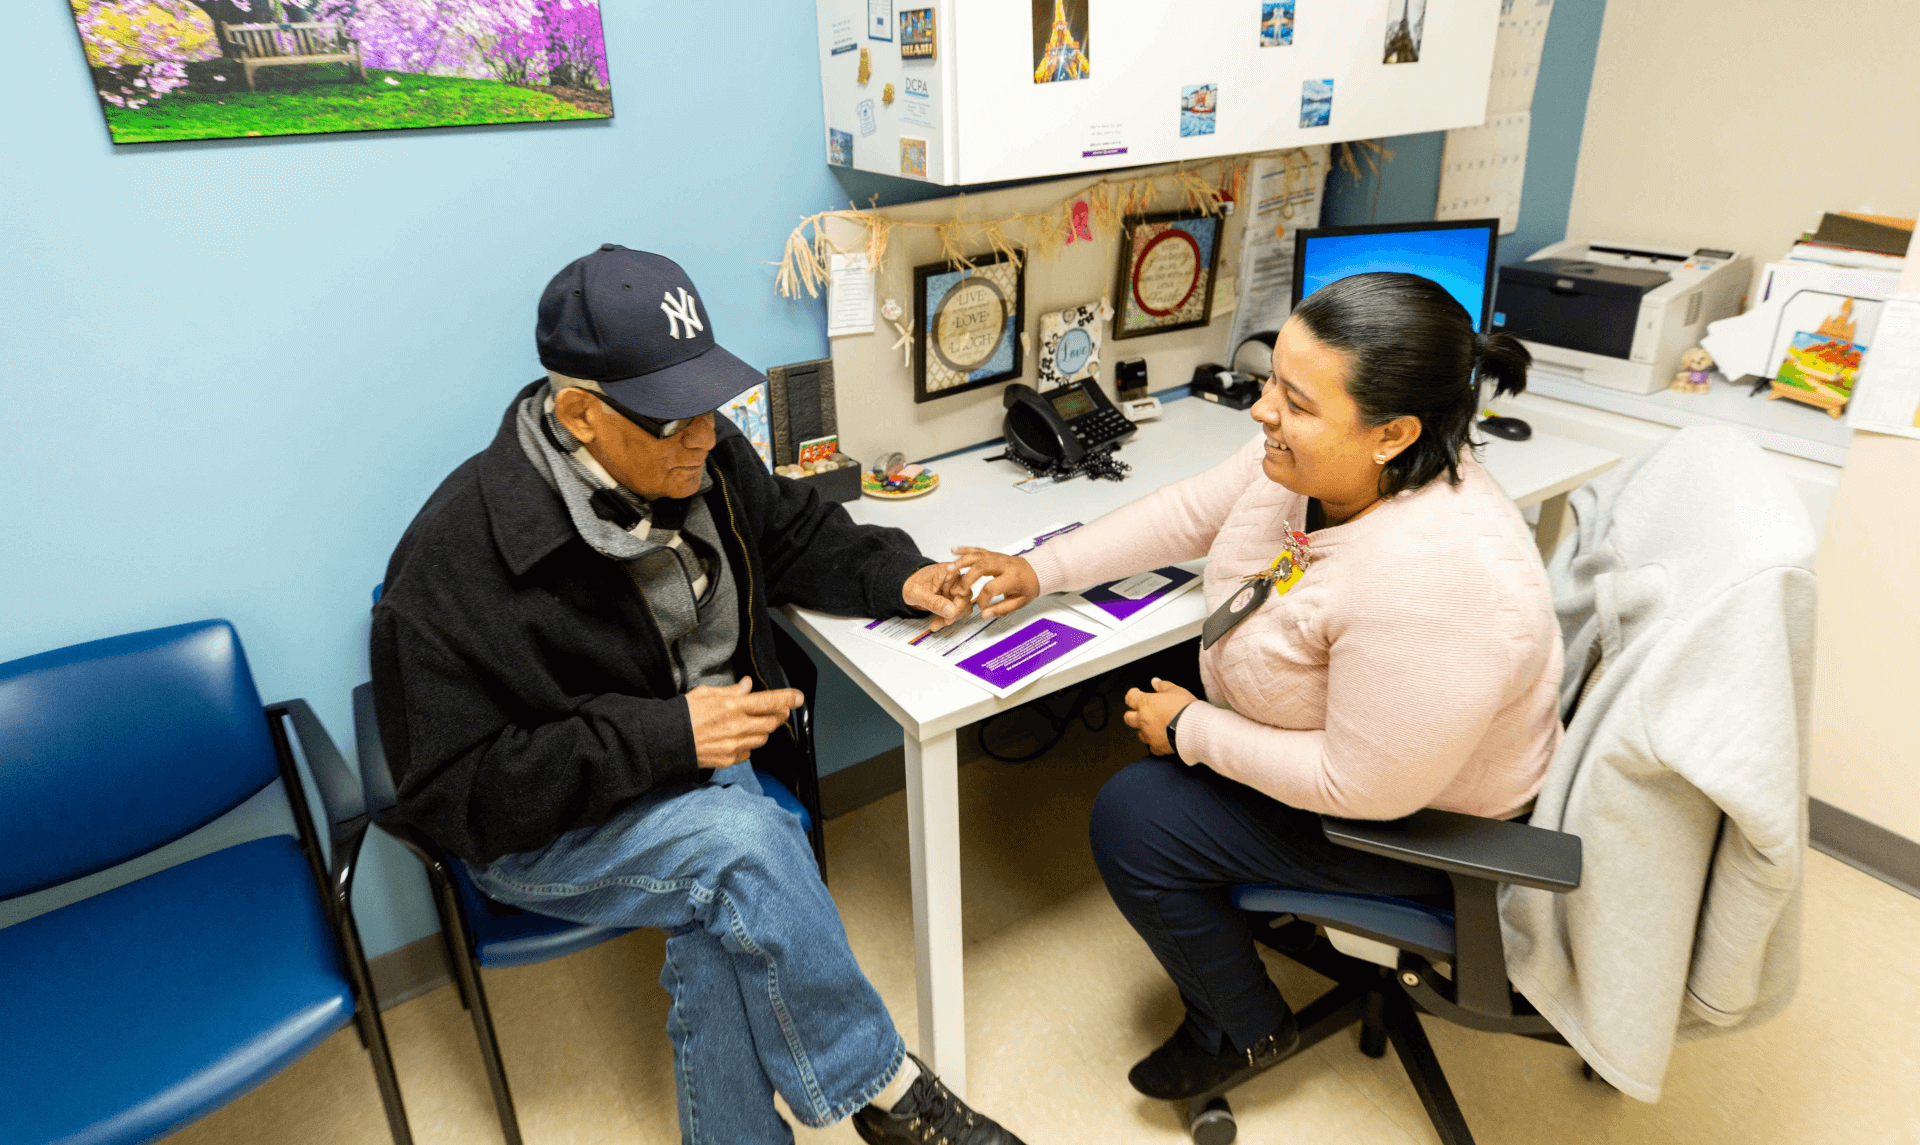 Obran Cooperative is working to fundamentally change systems by improving outcomes for worker-owners. This means thinking about how its affiliates provide services to patients and how they can further help health care providers get more out of their careers.